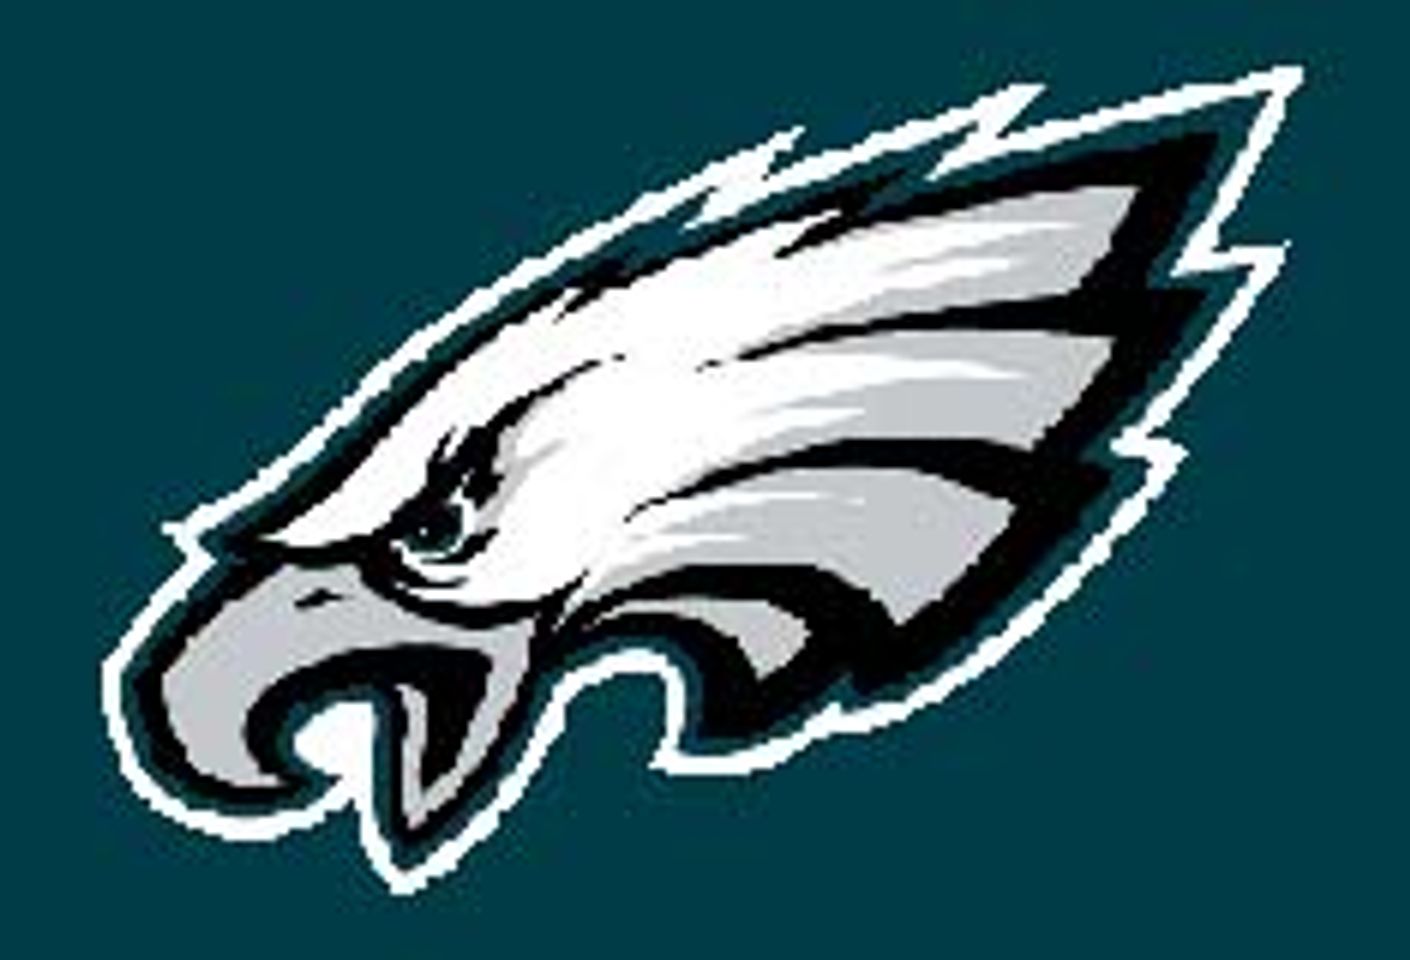 Eagles Fans Offer to Do Sex Show in Exchange for Tickets